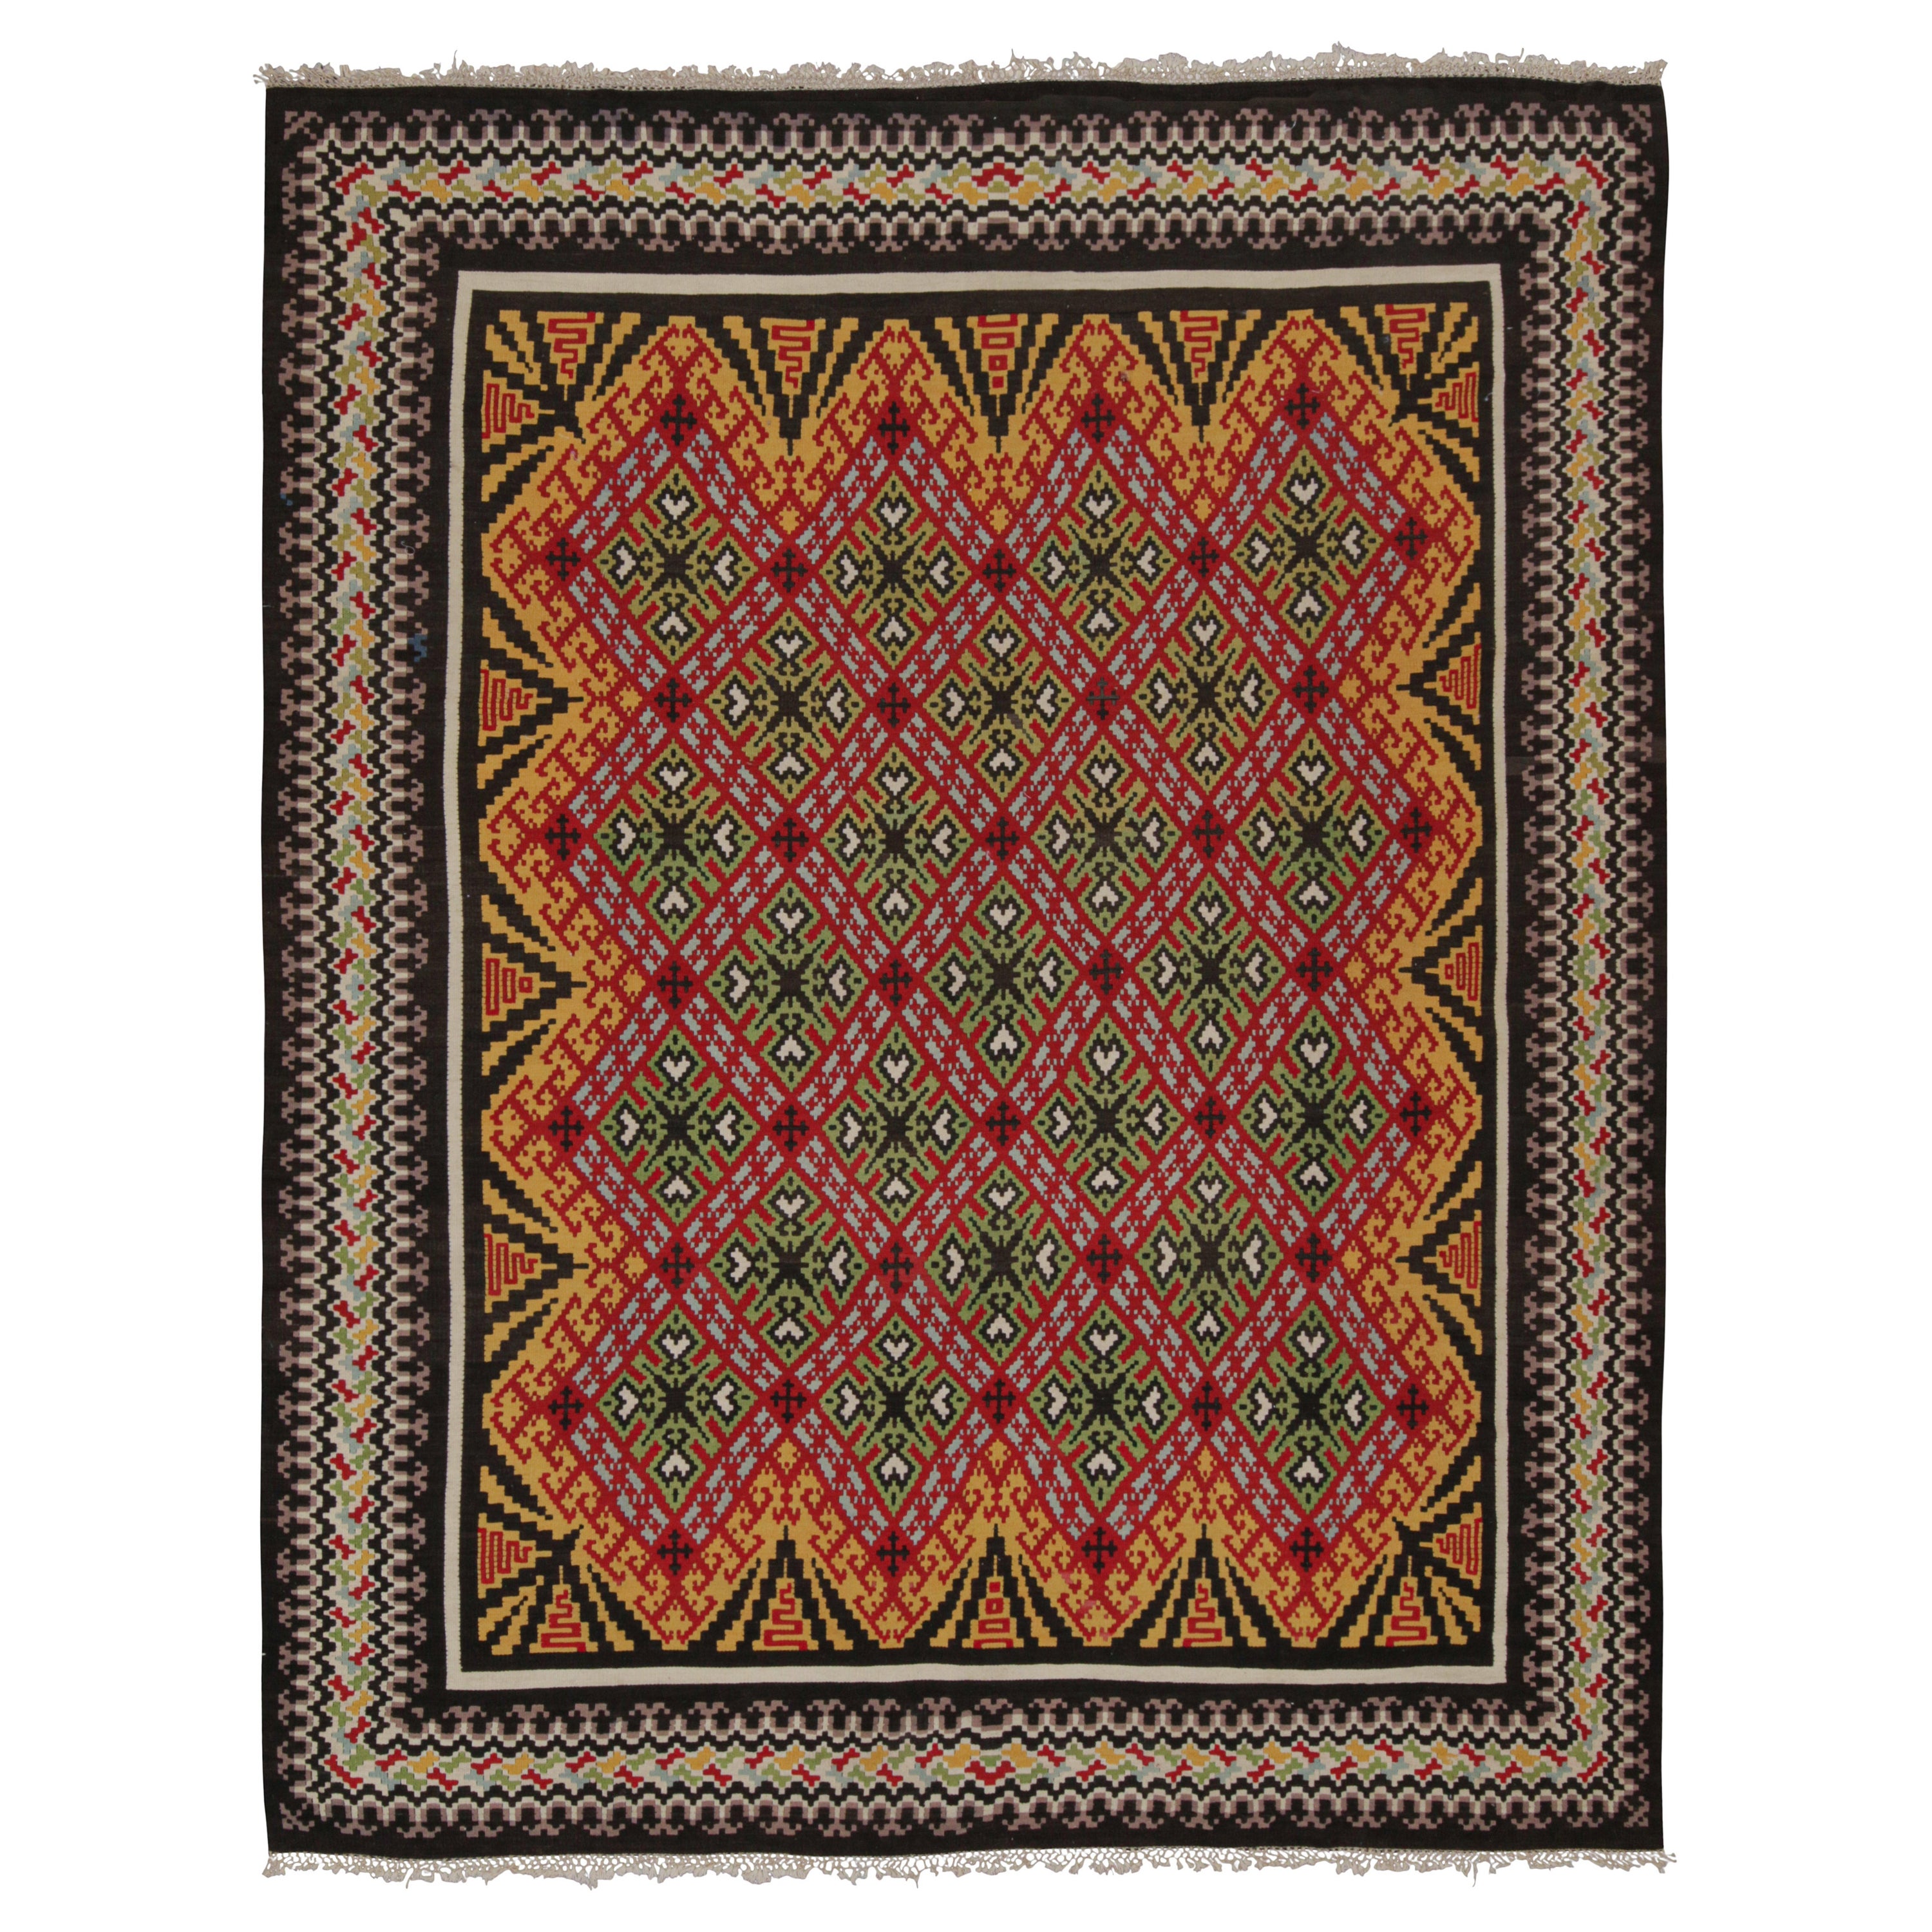 Vintage Balkan Kilim with Gold, Red & Green Geometric Patterns from Rug & Kilim